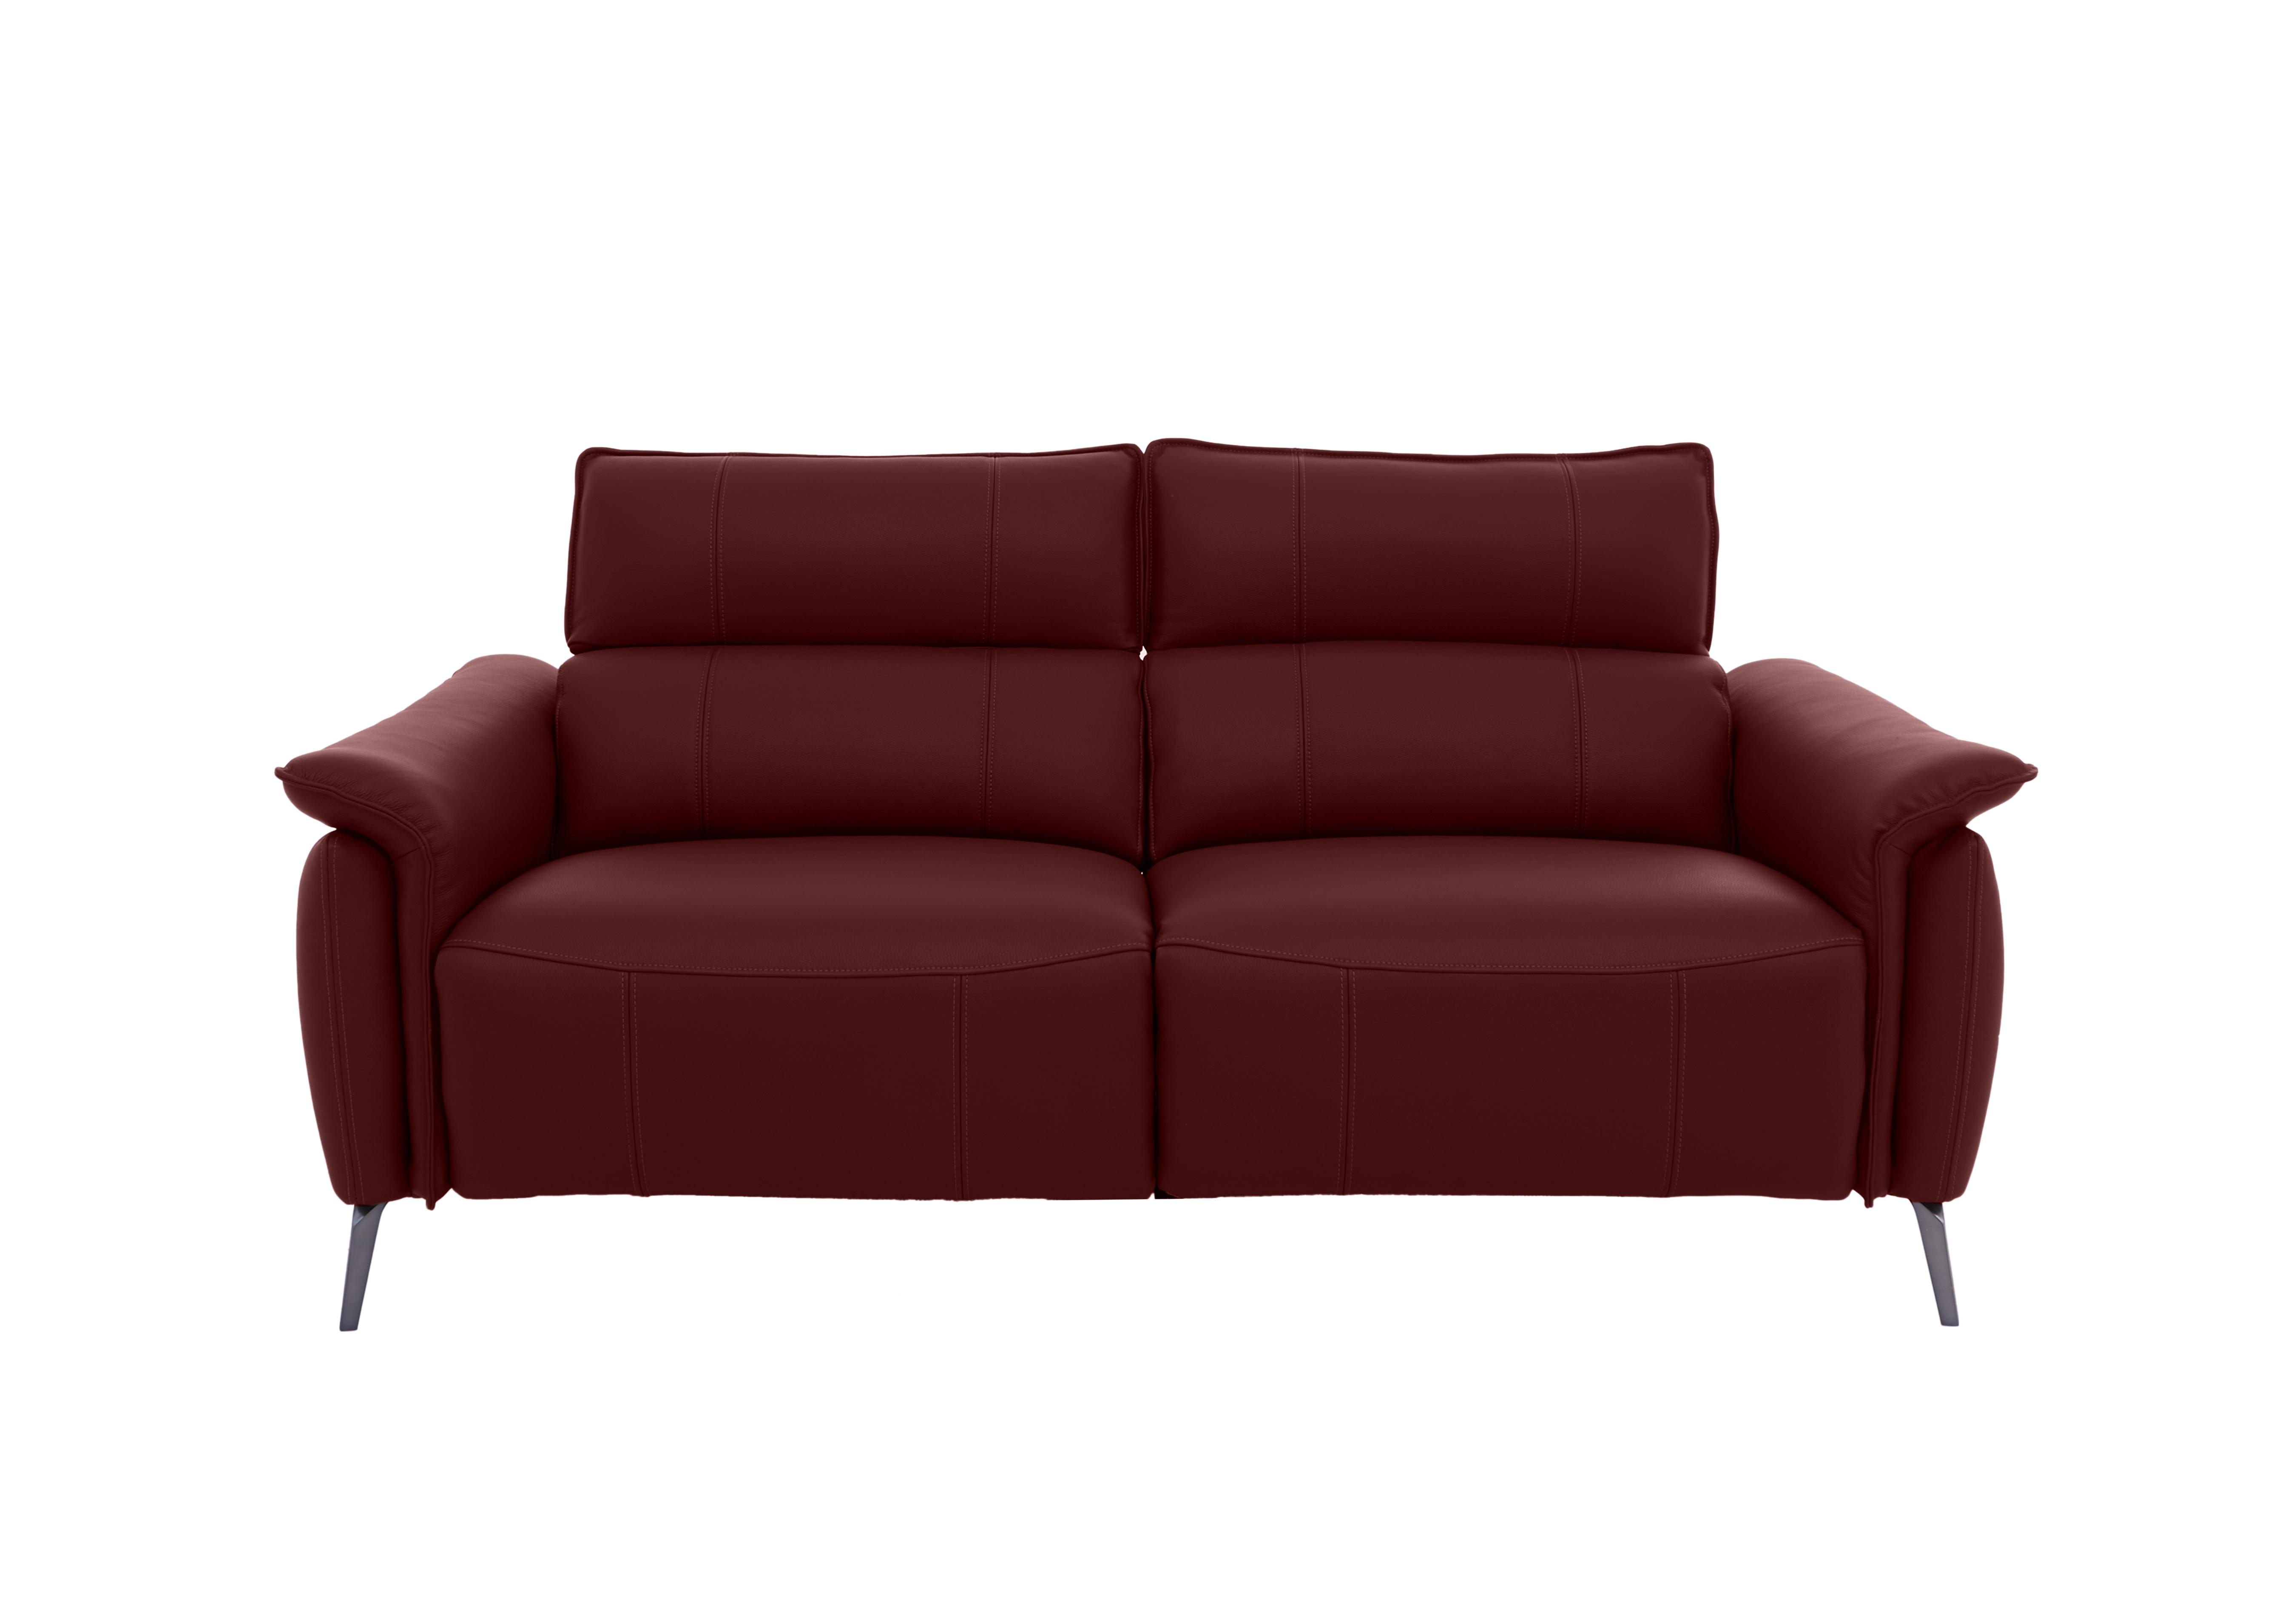 Jude 3 Seater Leather Sofa in Montana Ruby Cat-60/15 on Furniture Village